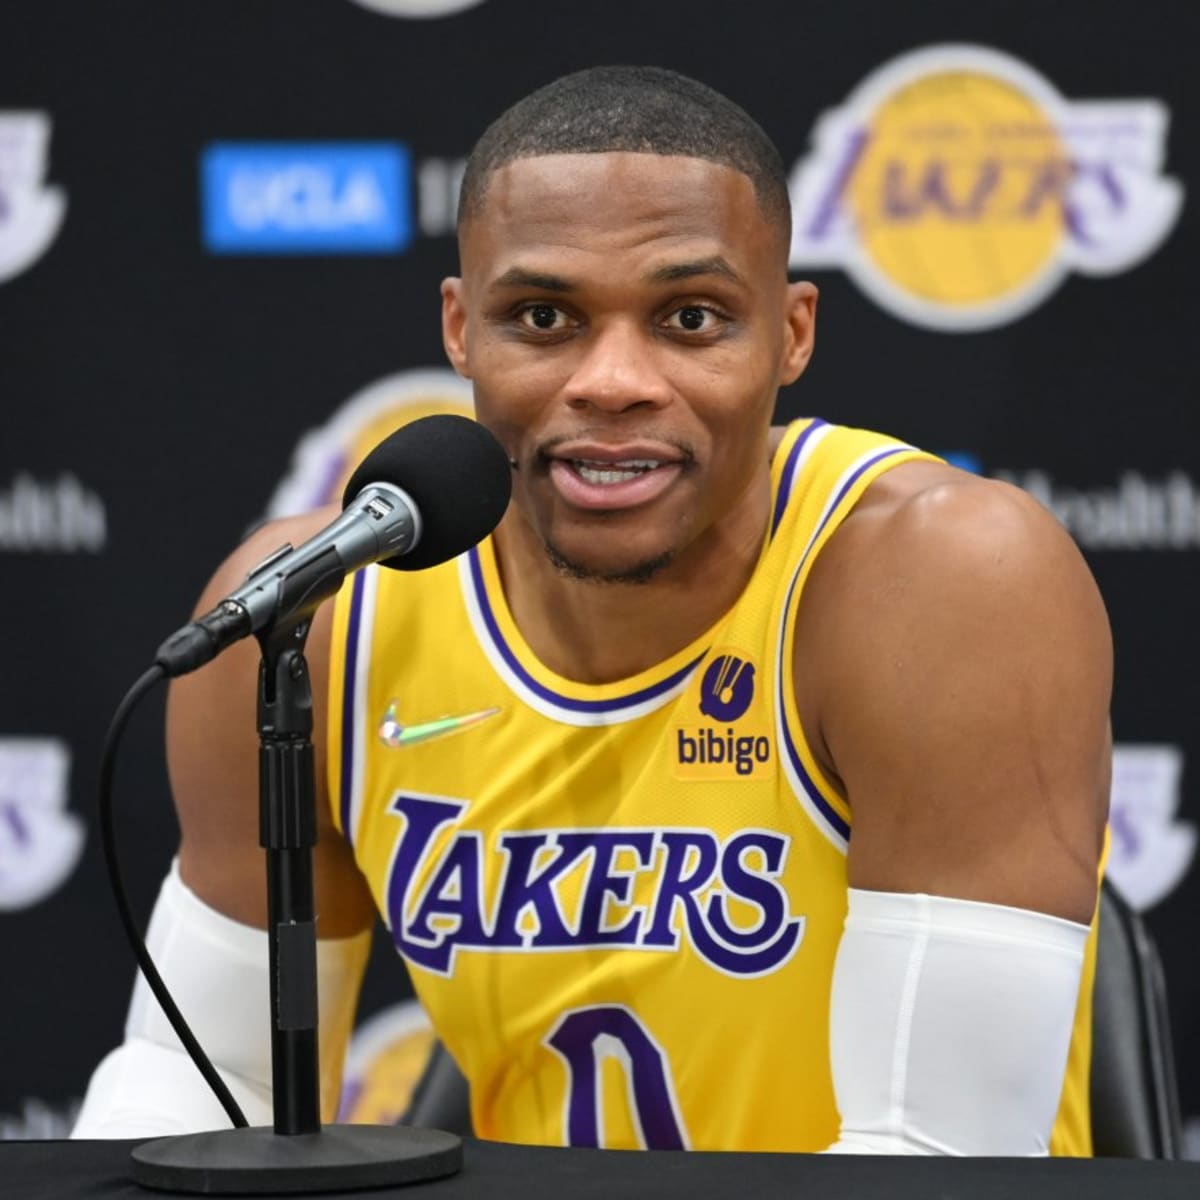 Per reports, Lakers seem adamant to keep Russell Westbrook for his